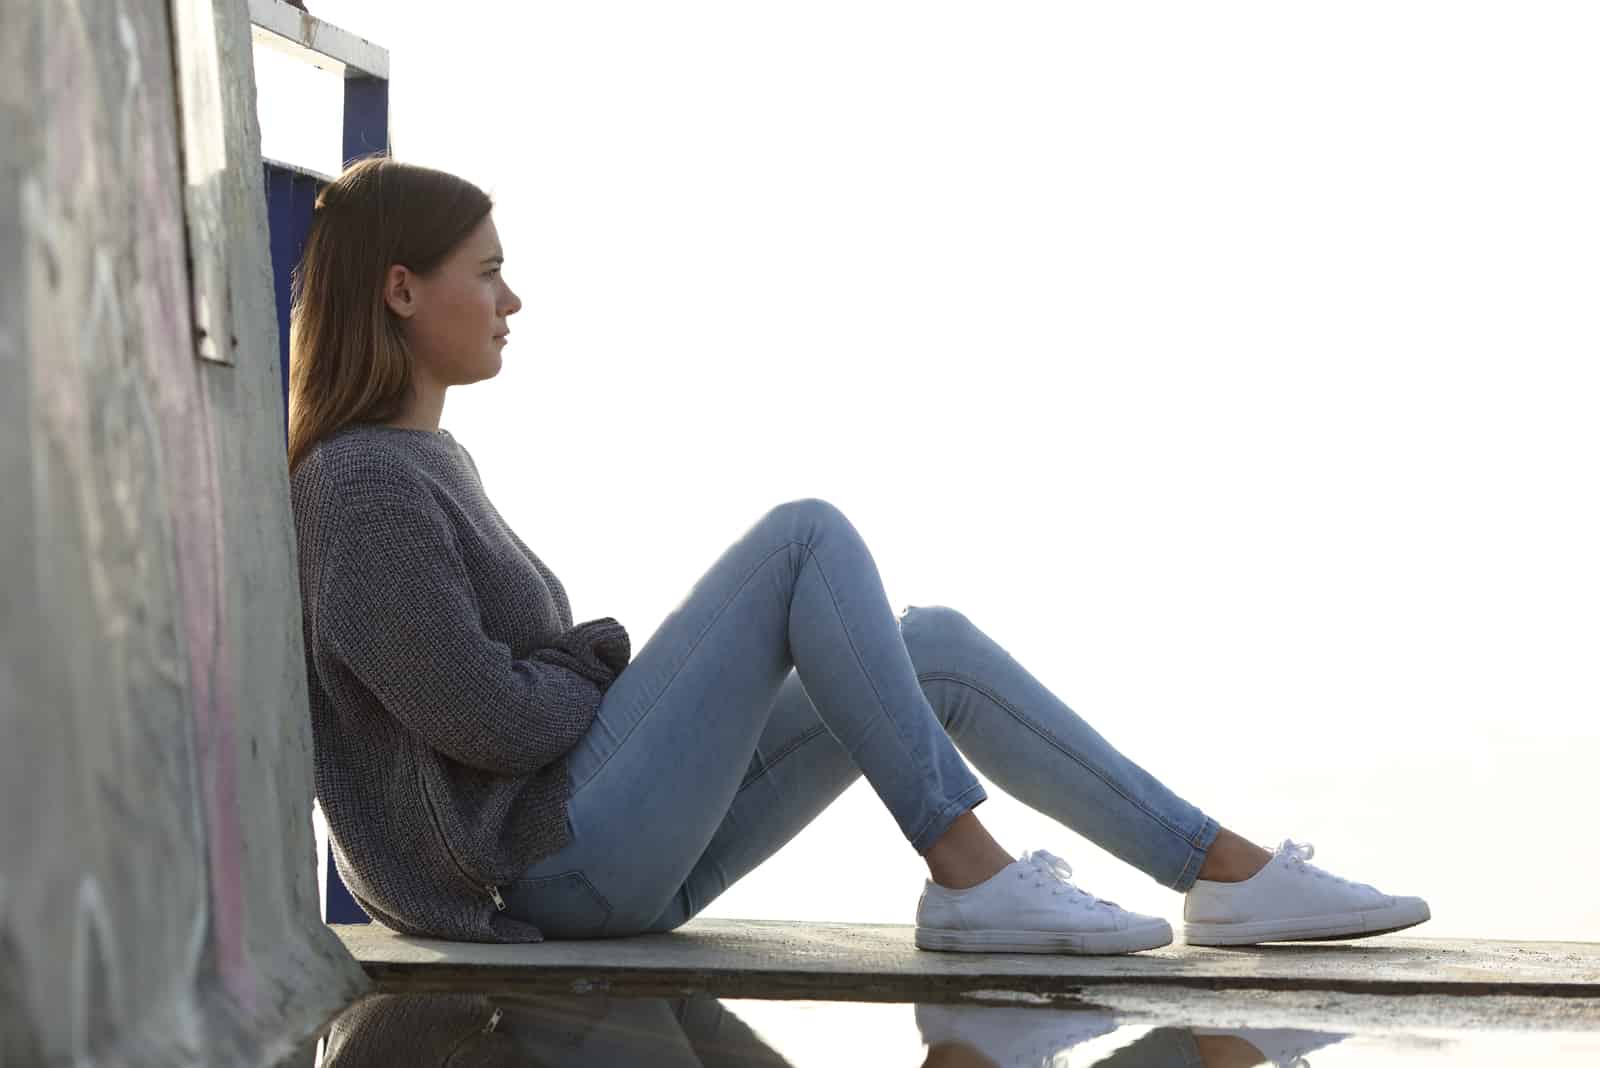 pensive woman sits on the pier